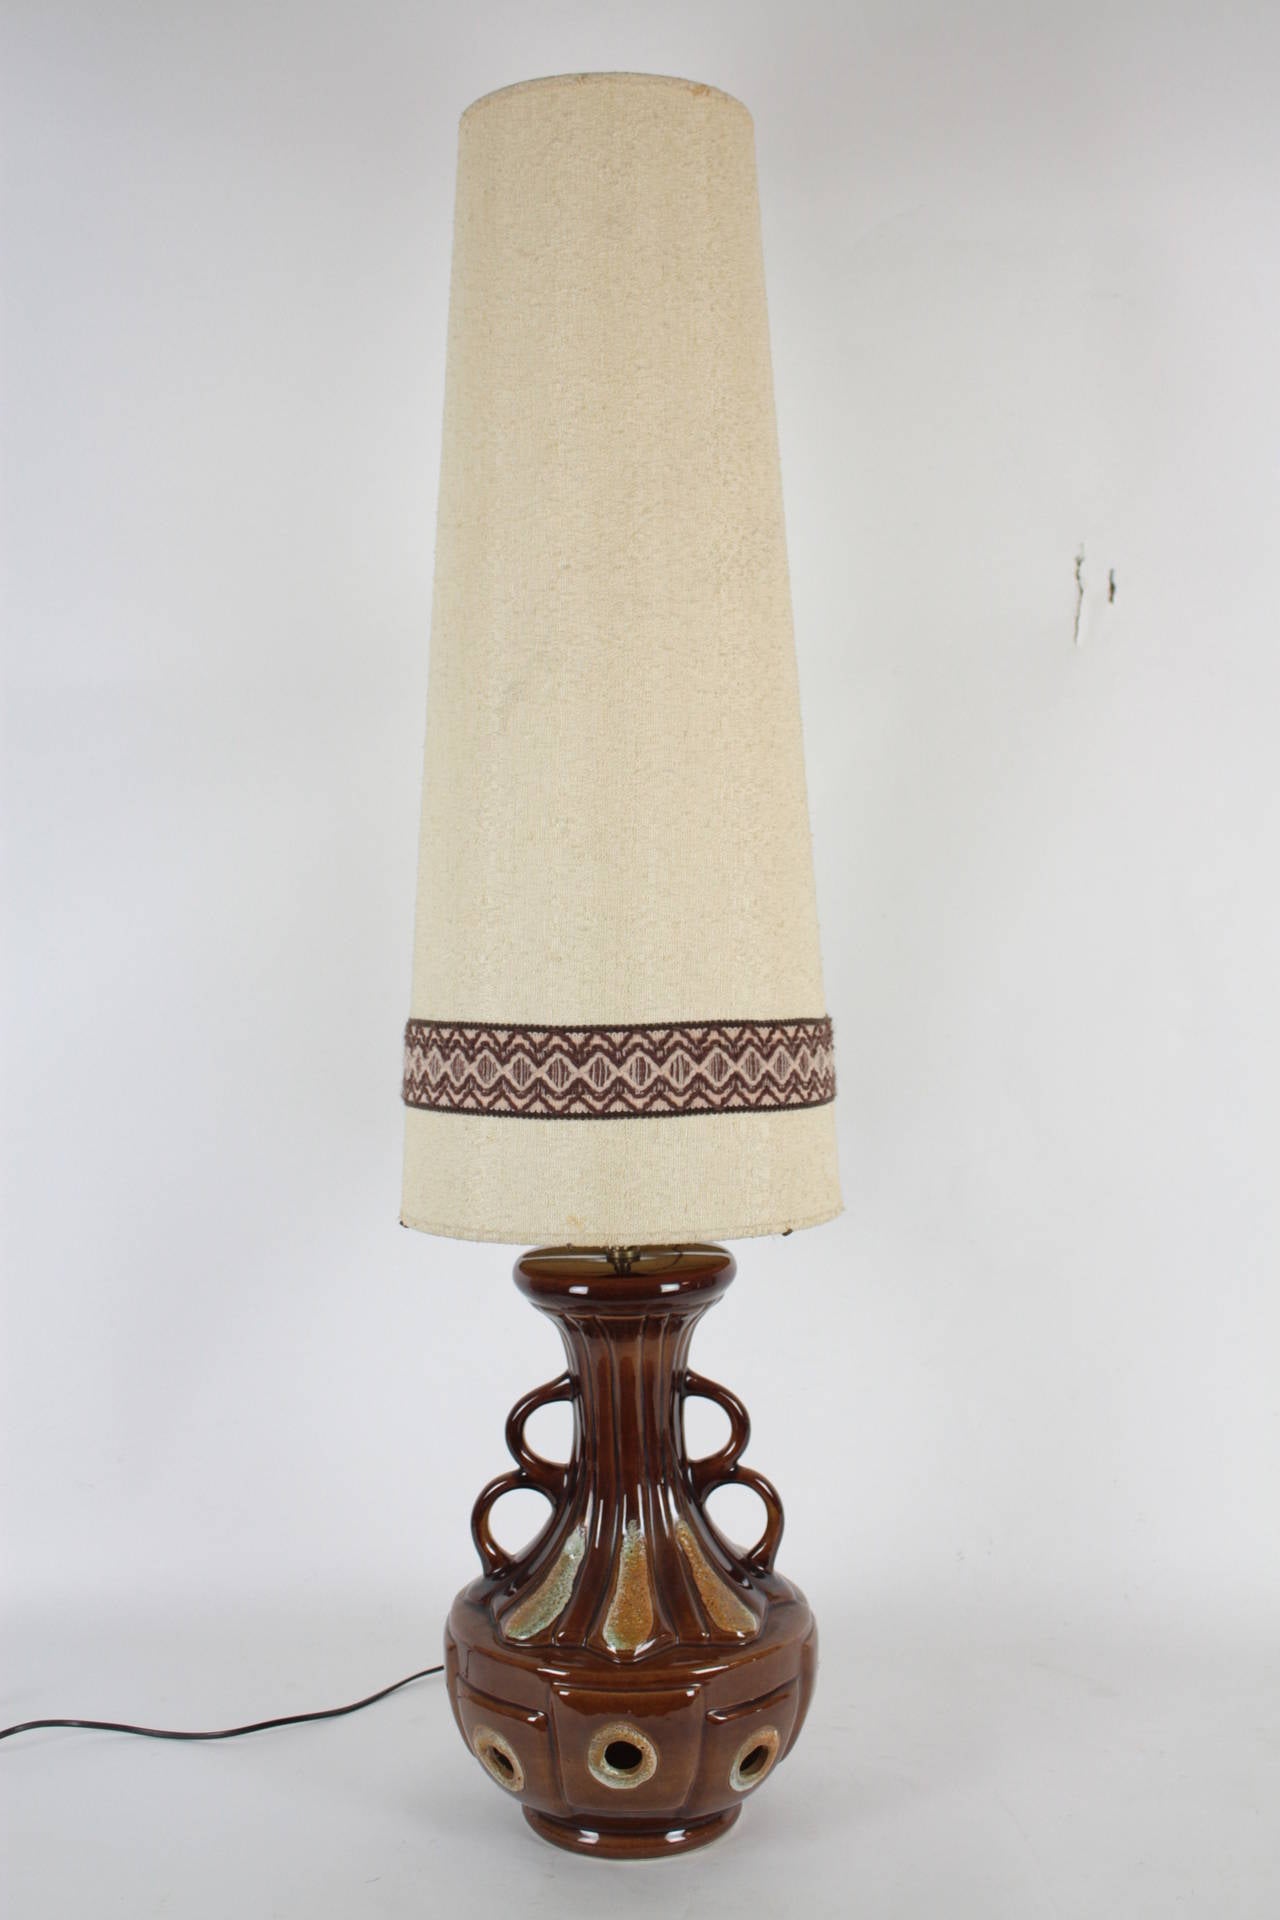 Gorgeous West germany pottery table lamp with its original shade.

It could be used as a floor lamp because it is oversized.

Very beautiful original vintage fabric lamp shade with sewn brown details.

2 bulbs, one at the shade and the other